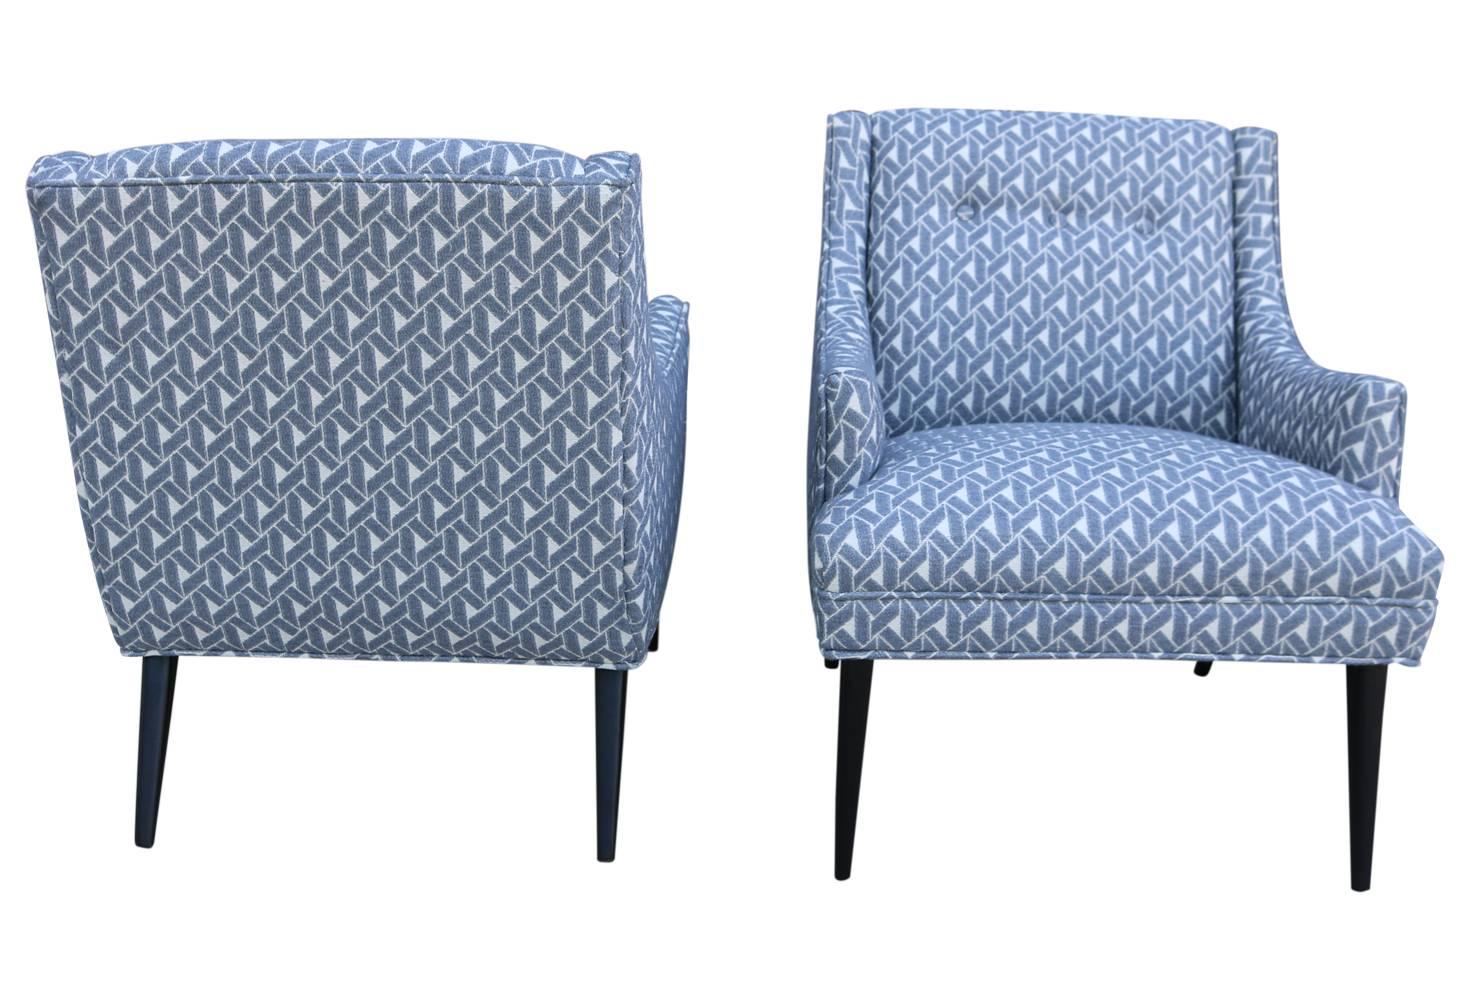 American Pair of Mid-Century Modern Armchairs with Grey and White Geometric Upholstery